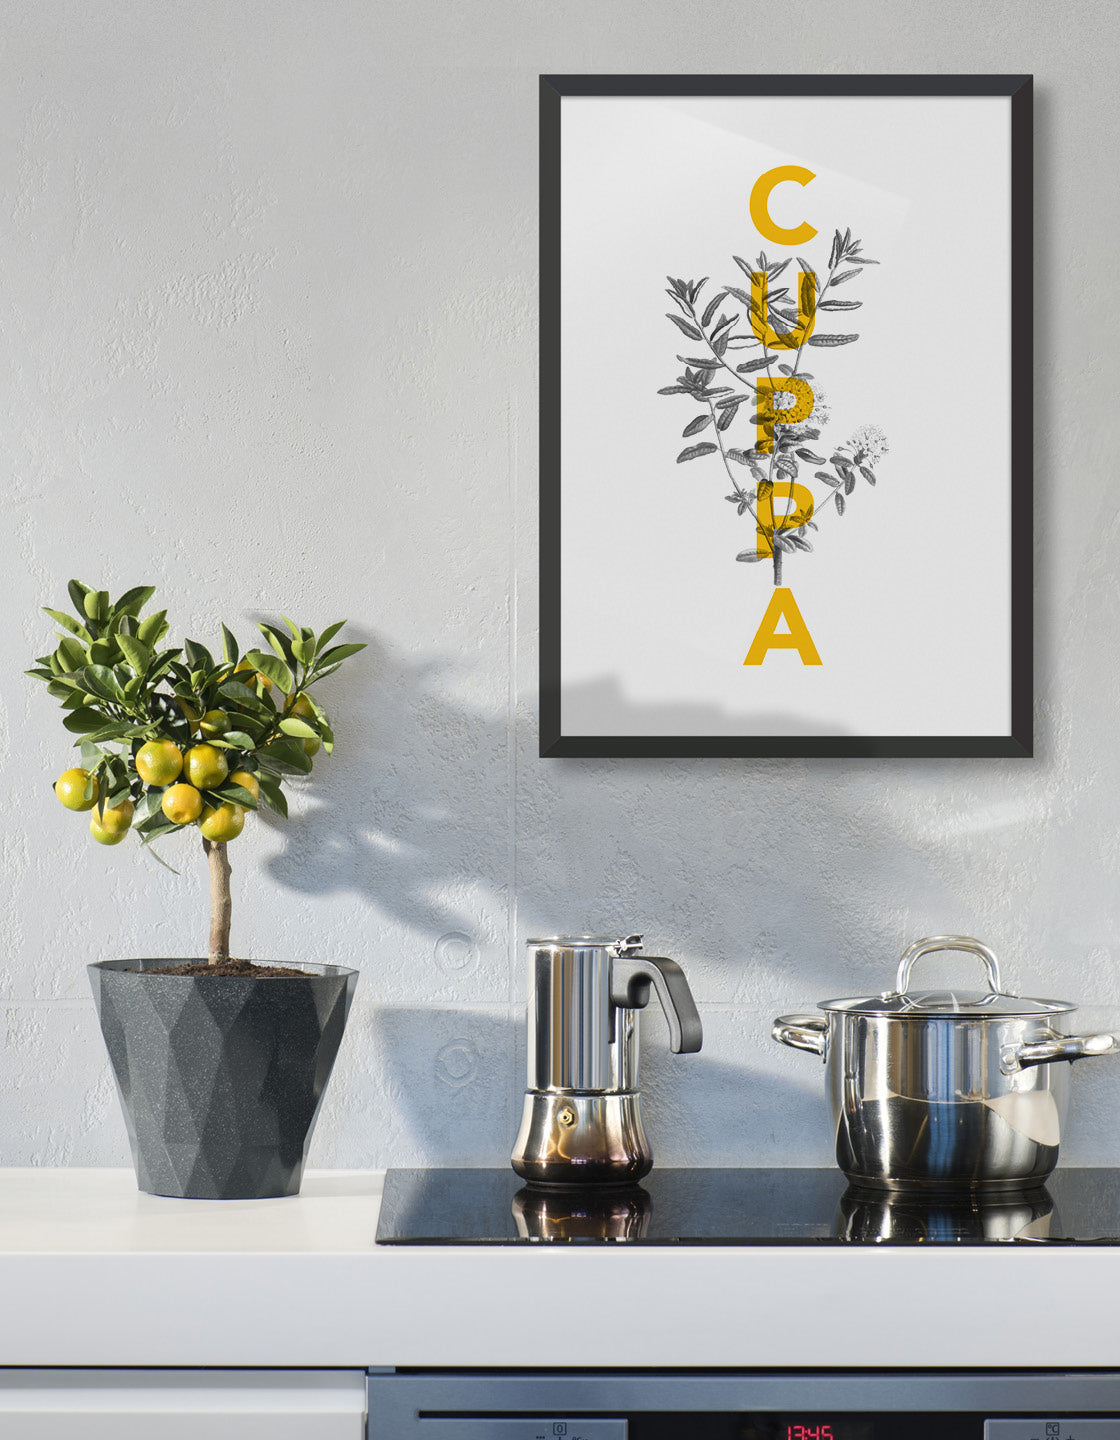 Cuppa typography print - features the text Cuppa in yellow overlaid onto a line drawing of a tea plant